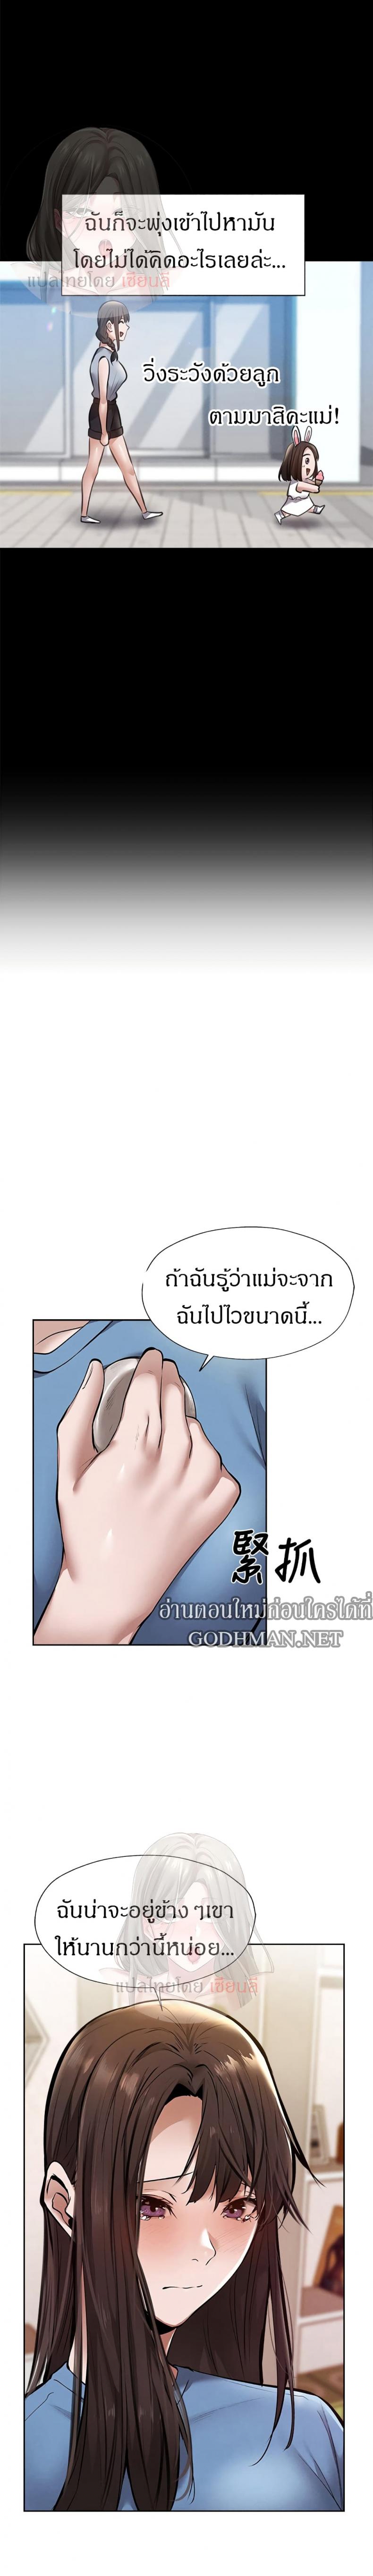 Is There an Empty Room? 61 ภาพที่ 27